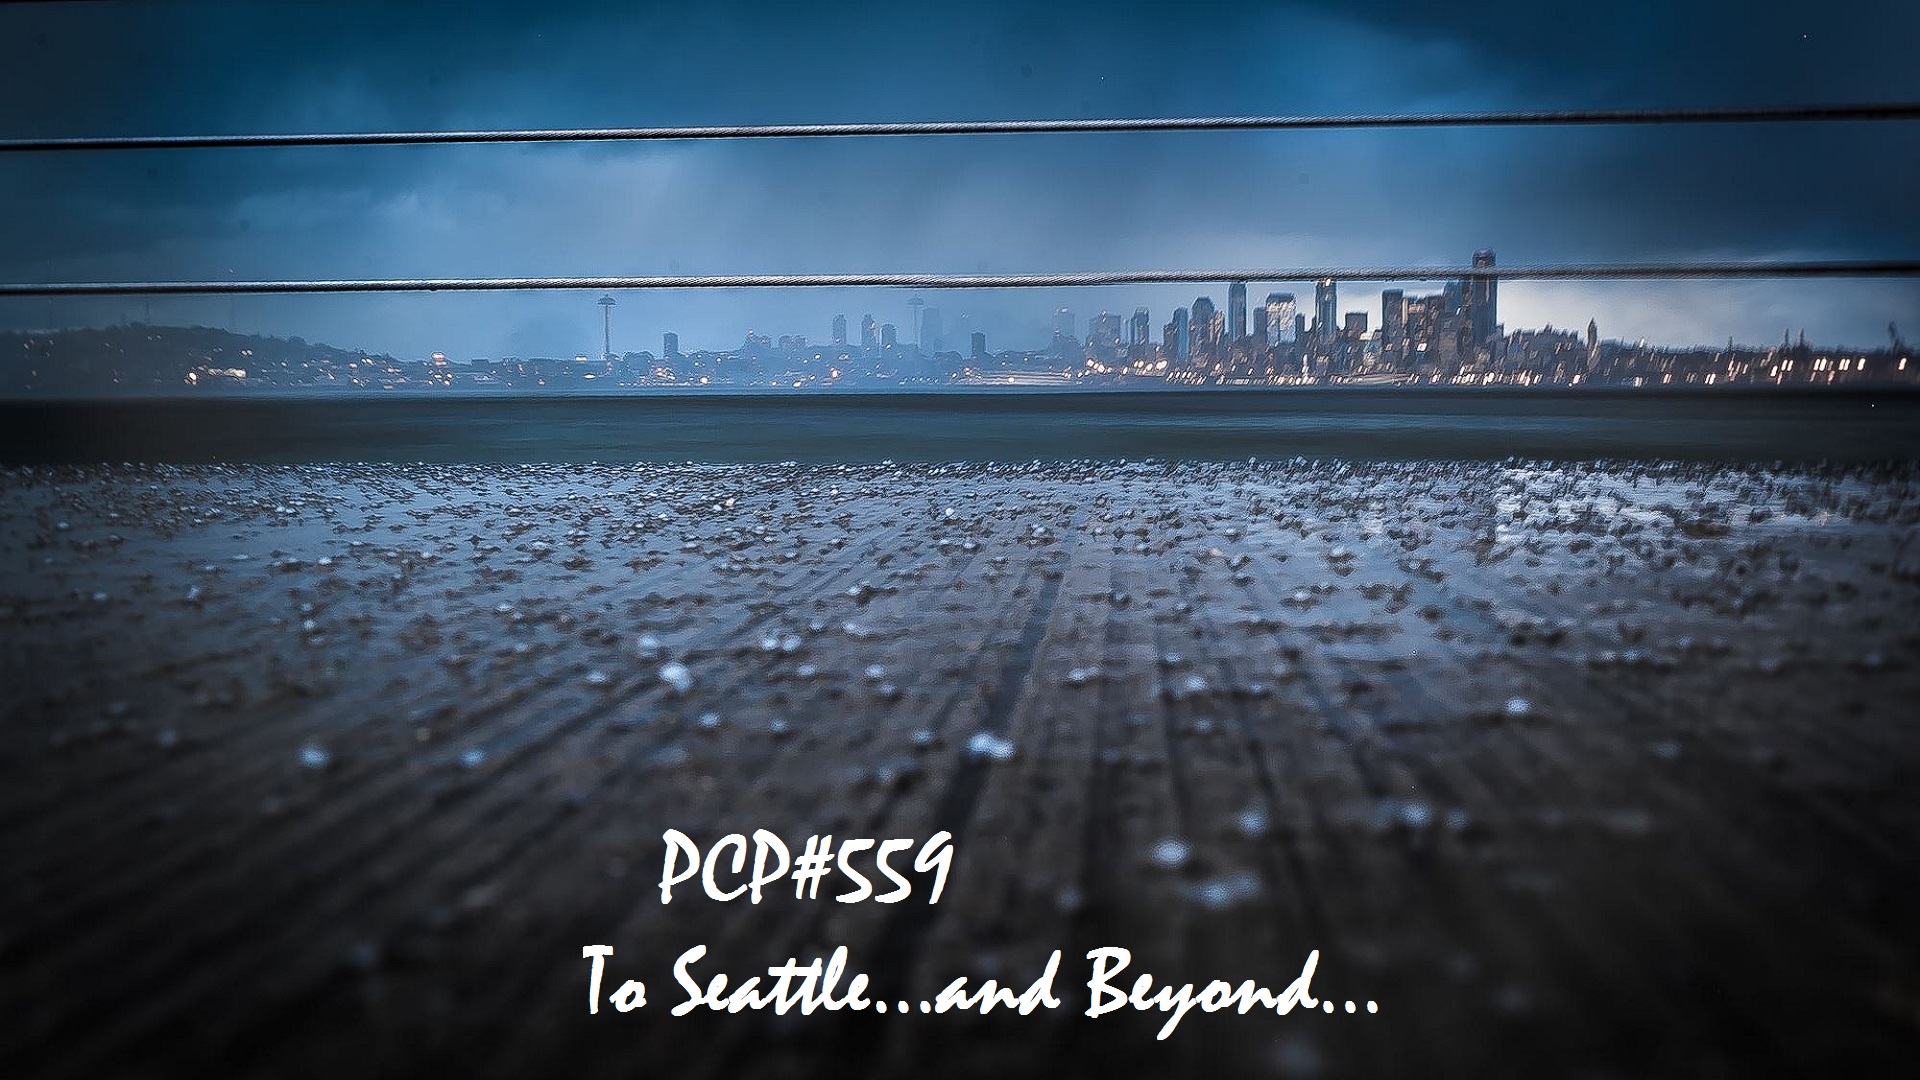 PCP#559... To Seattle .... and Beyond!...